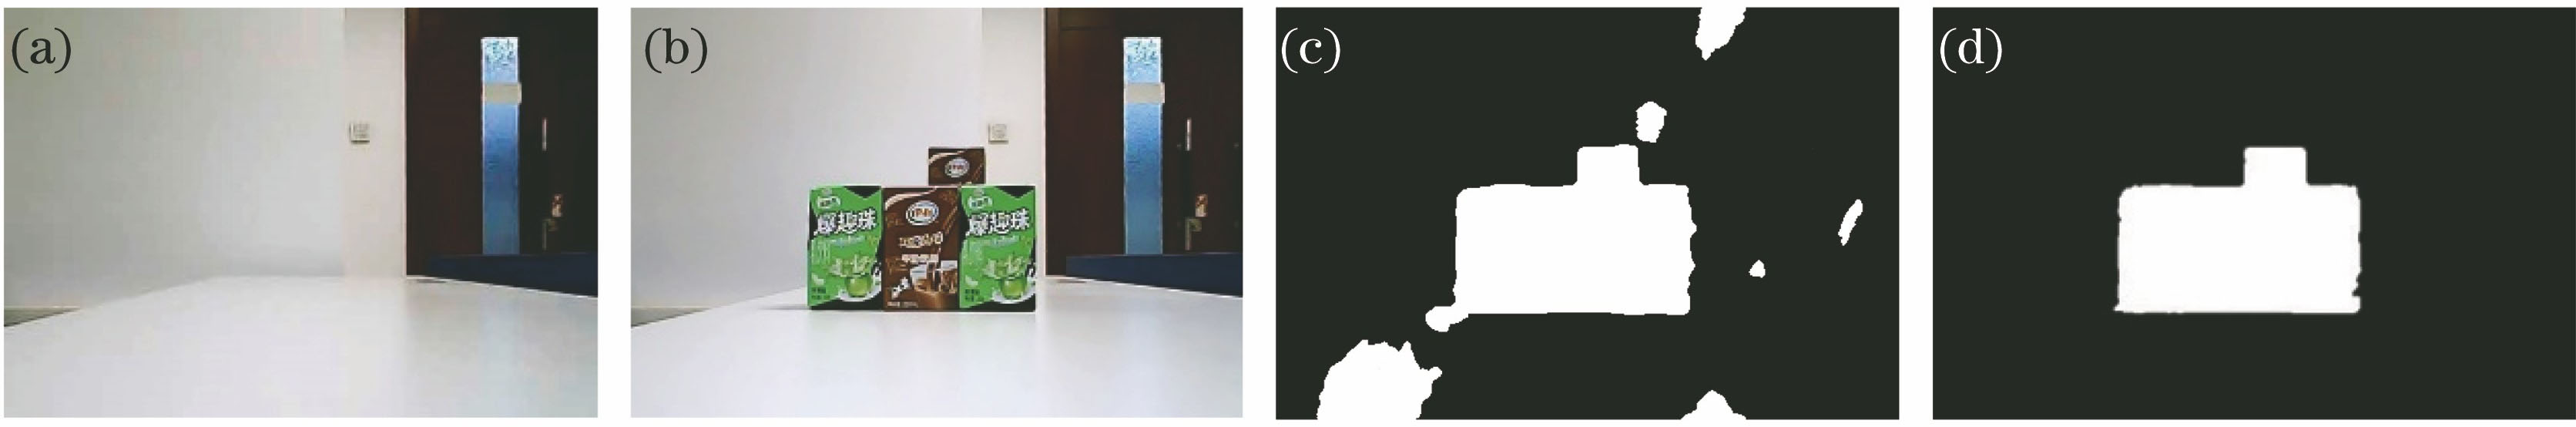 (a) Background image; (b) scene image; (c) result with fixed threshold; (d) result with adaptive threshold